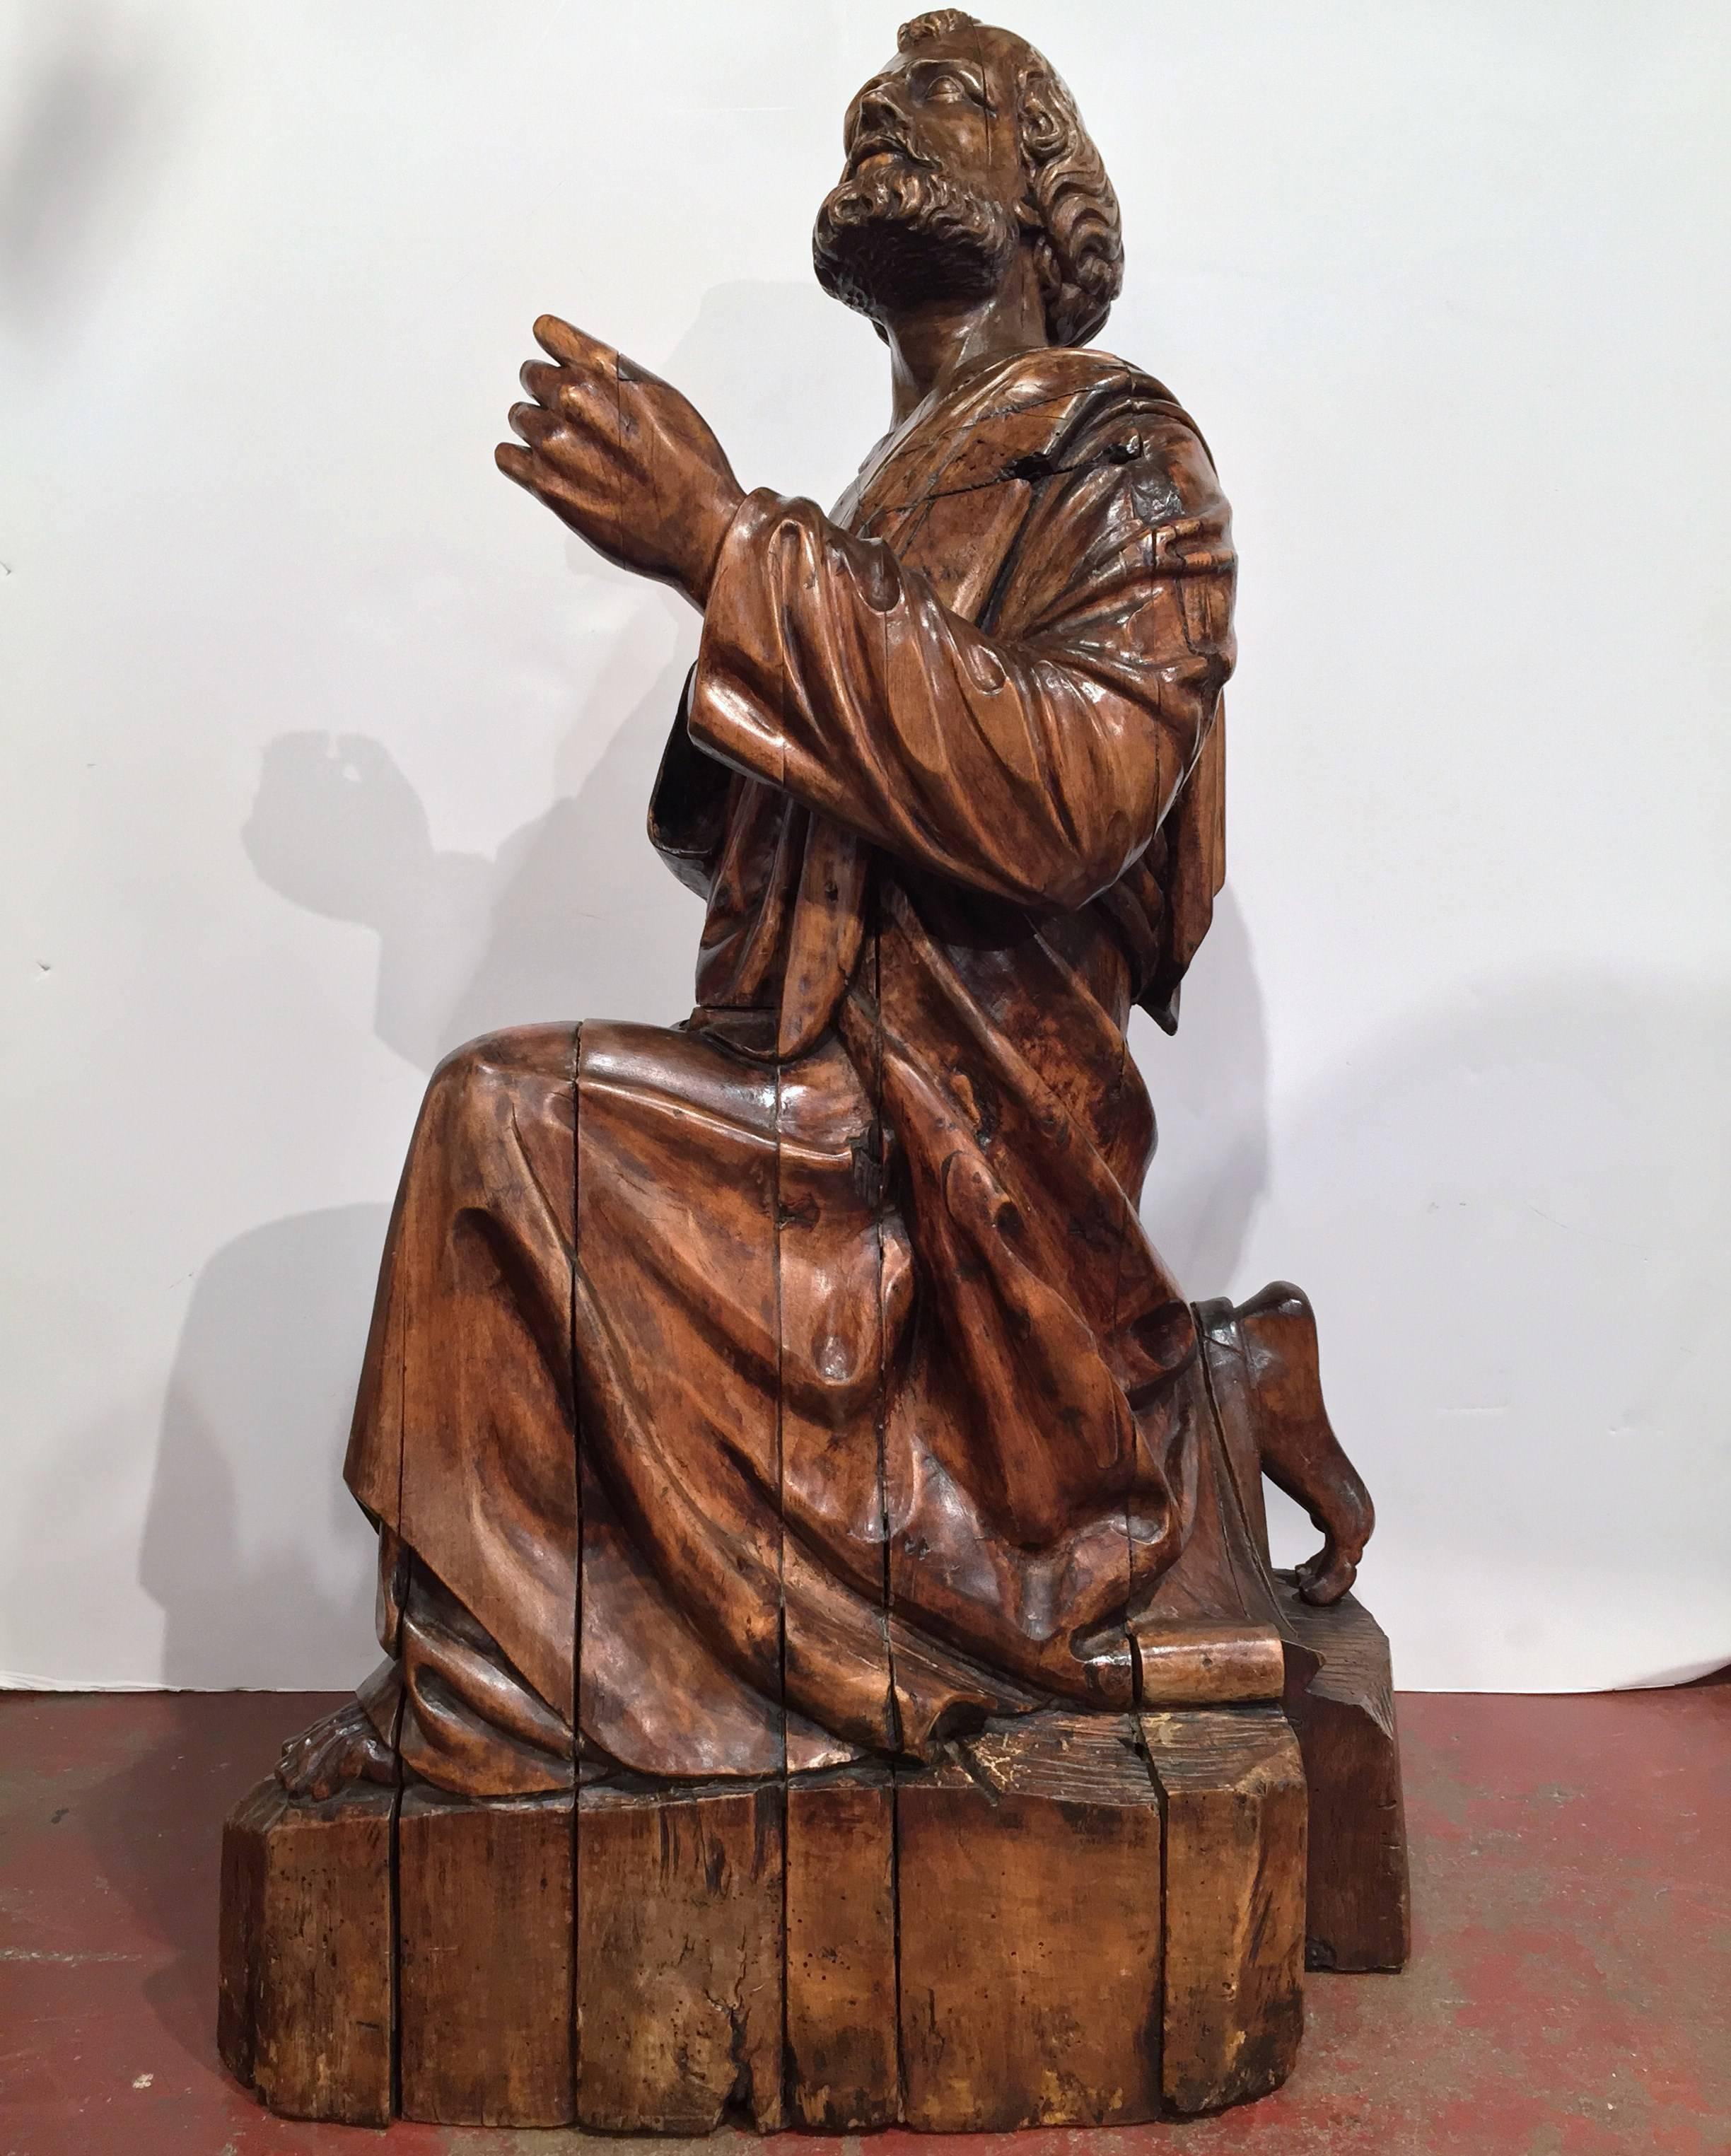 Hand-Carved 18th Century French Hand Carved Walnut Sculpture of Saint Peter the Apostle